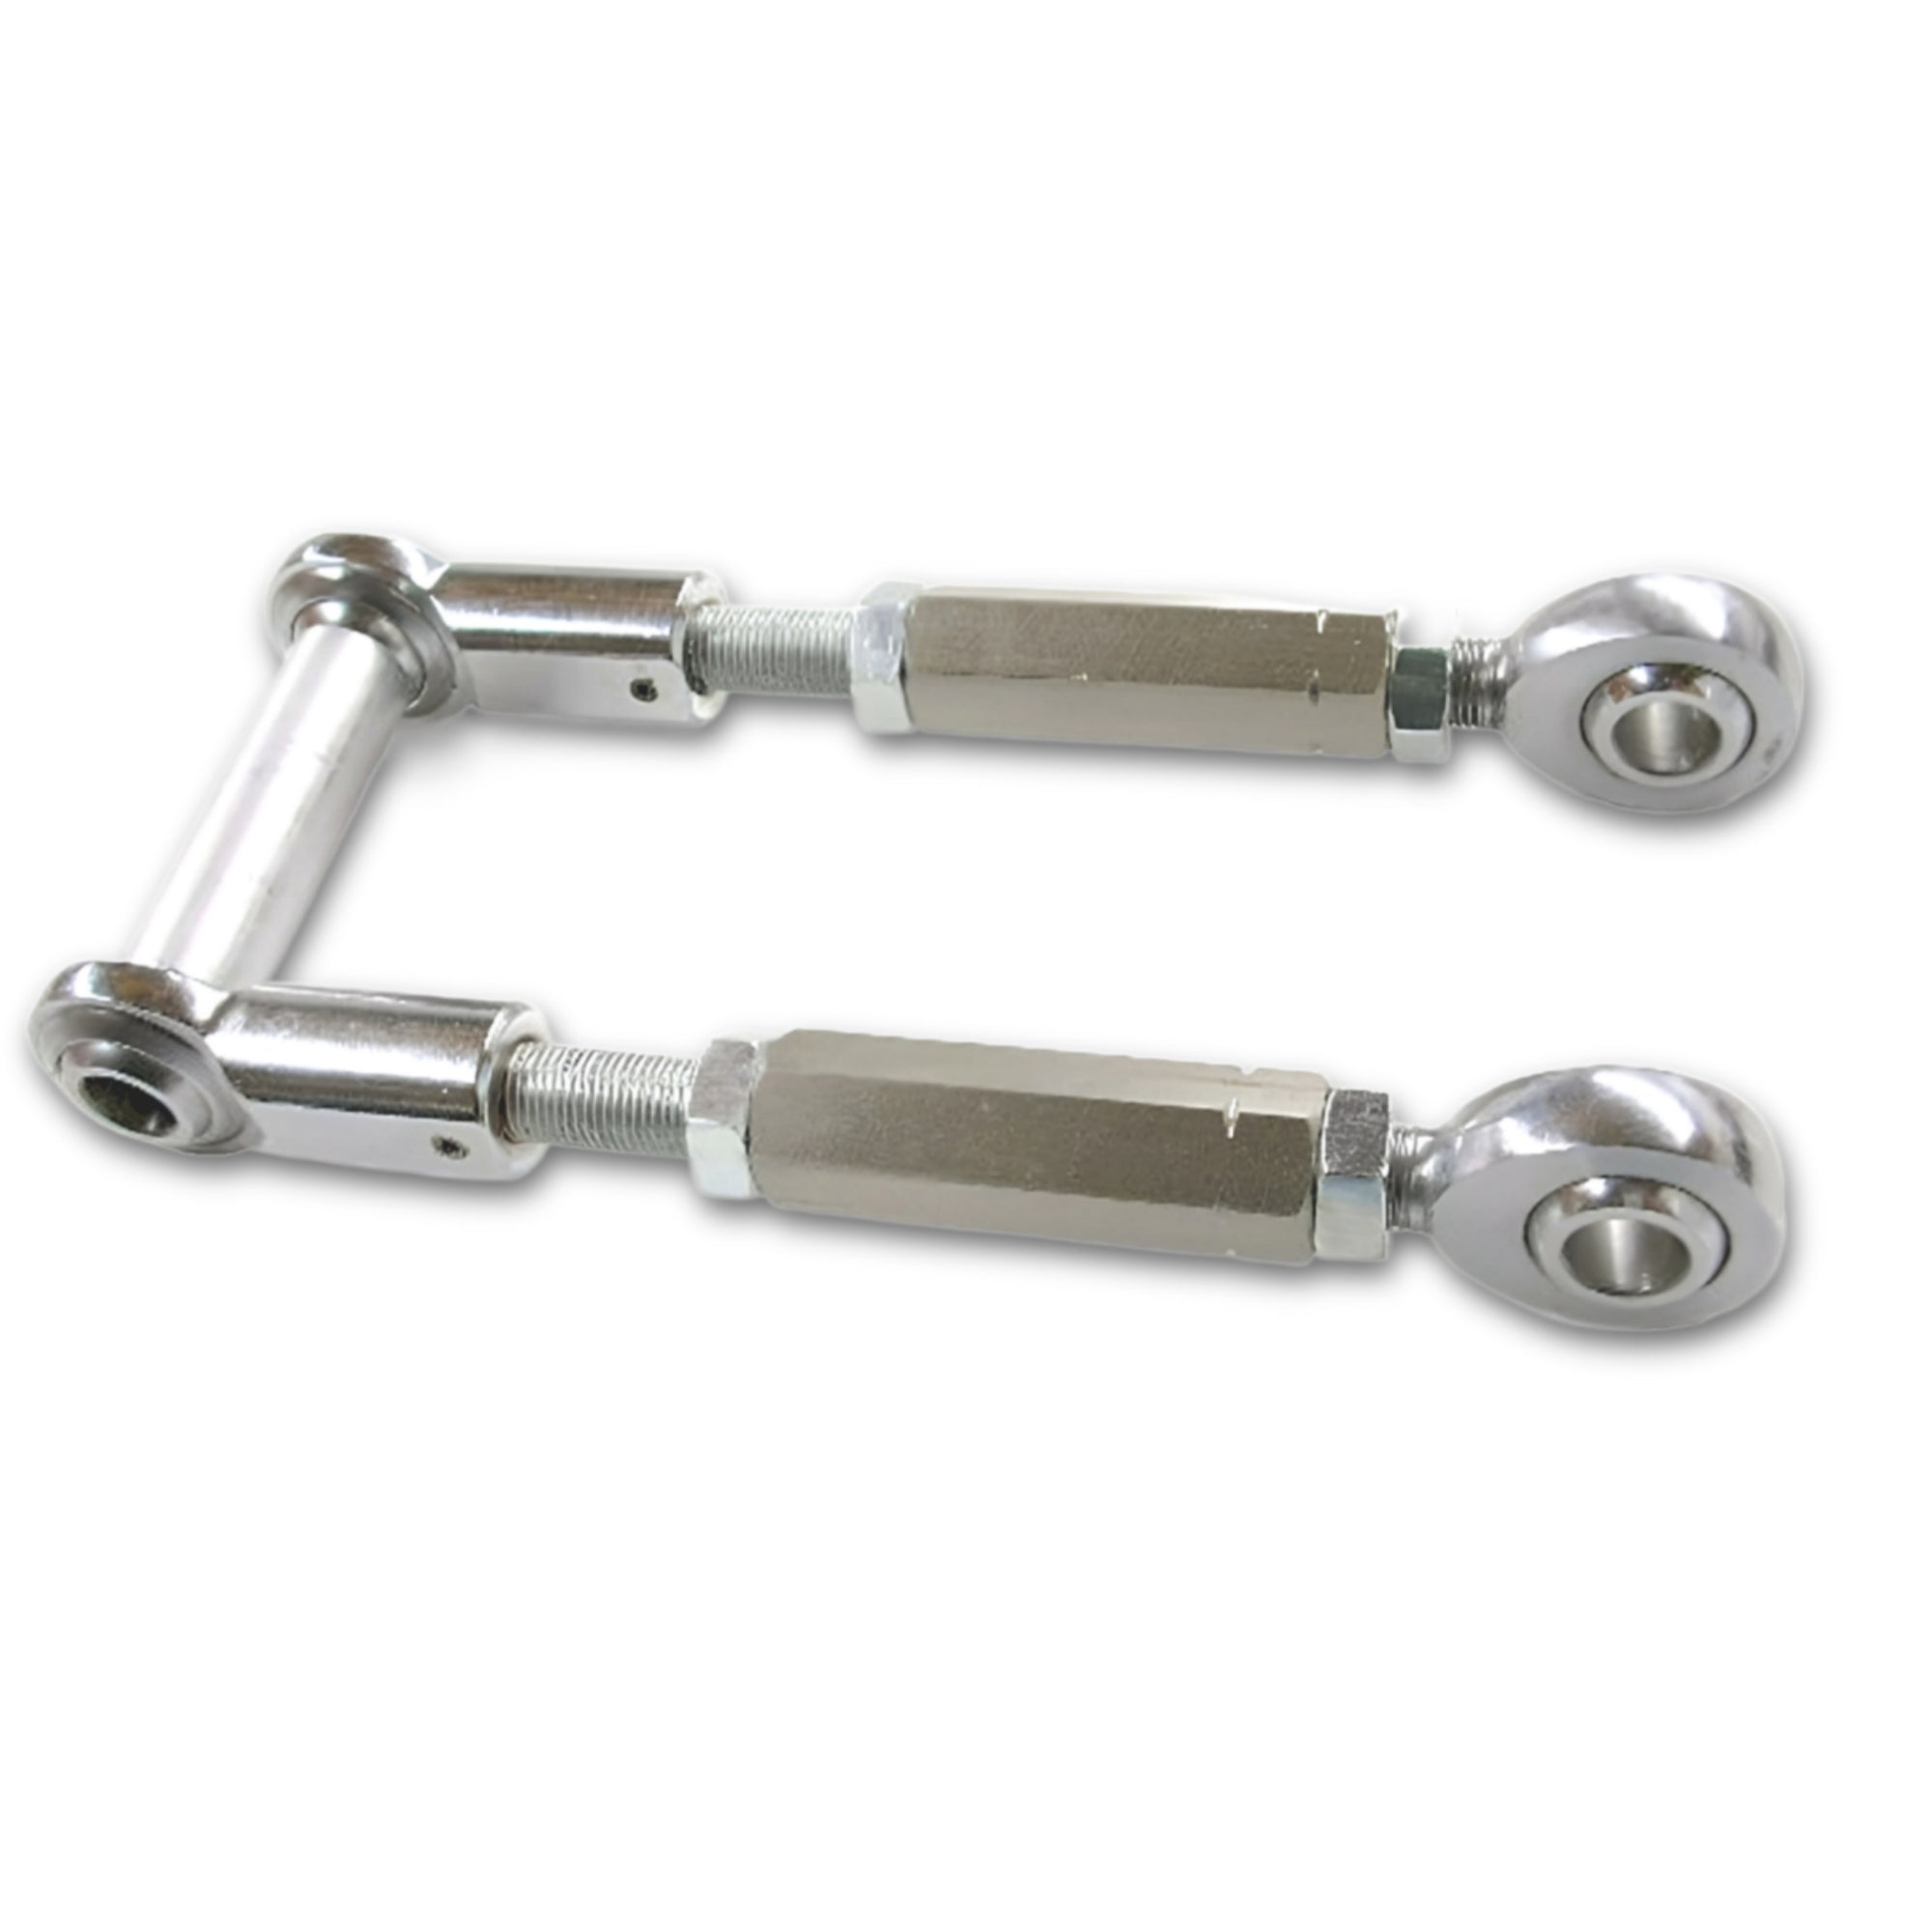 GSXR750 2006-2010 Adjustable Lowering Links Kit 4 Inches Lower